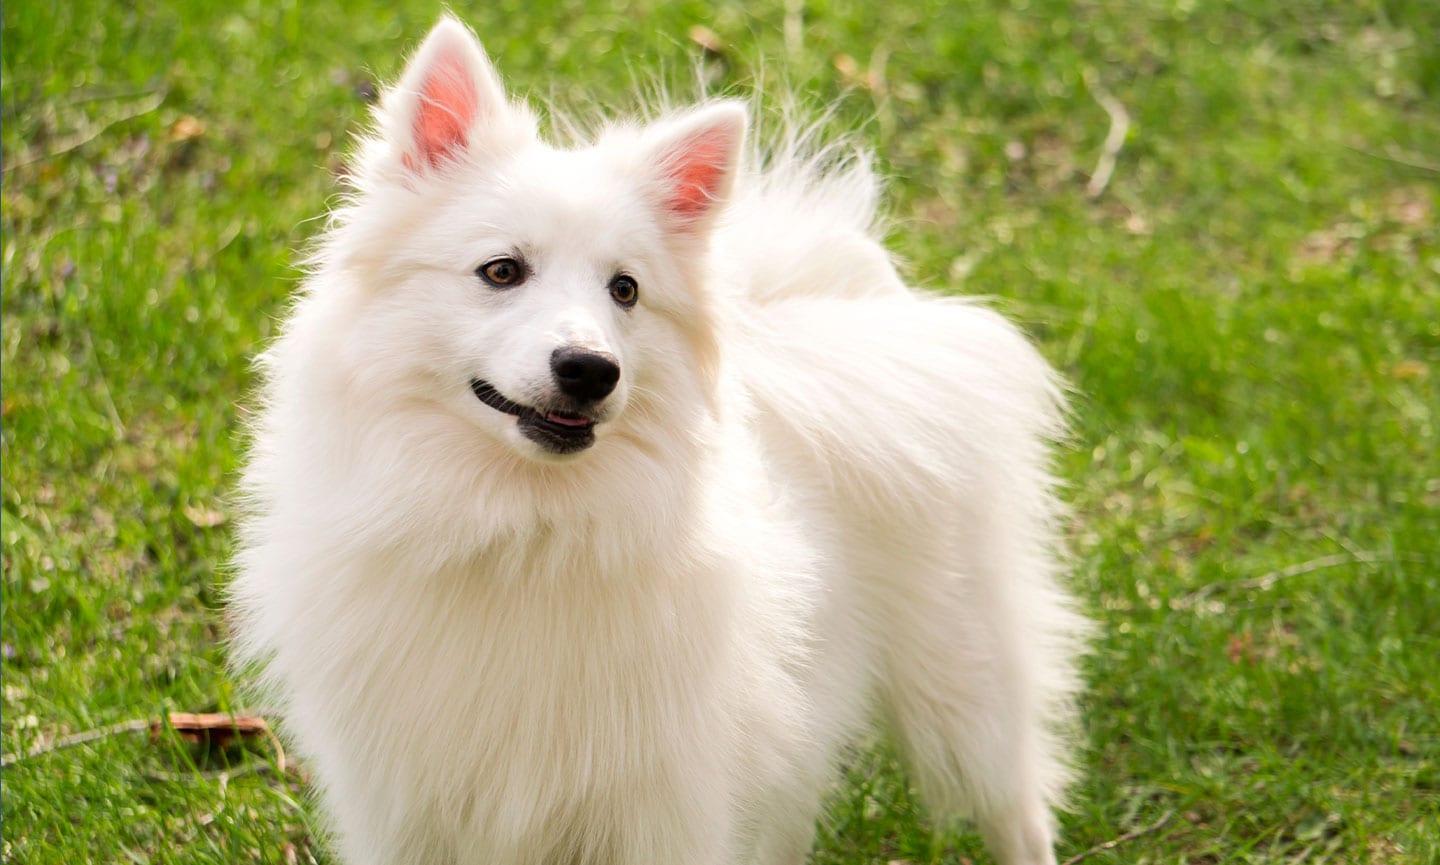 This 🐕 Dog Breeds Quiz May Be a Liiiittle Challenging, But Let’s See If You Can Score 15/20 American Eskimo Dog